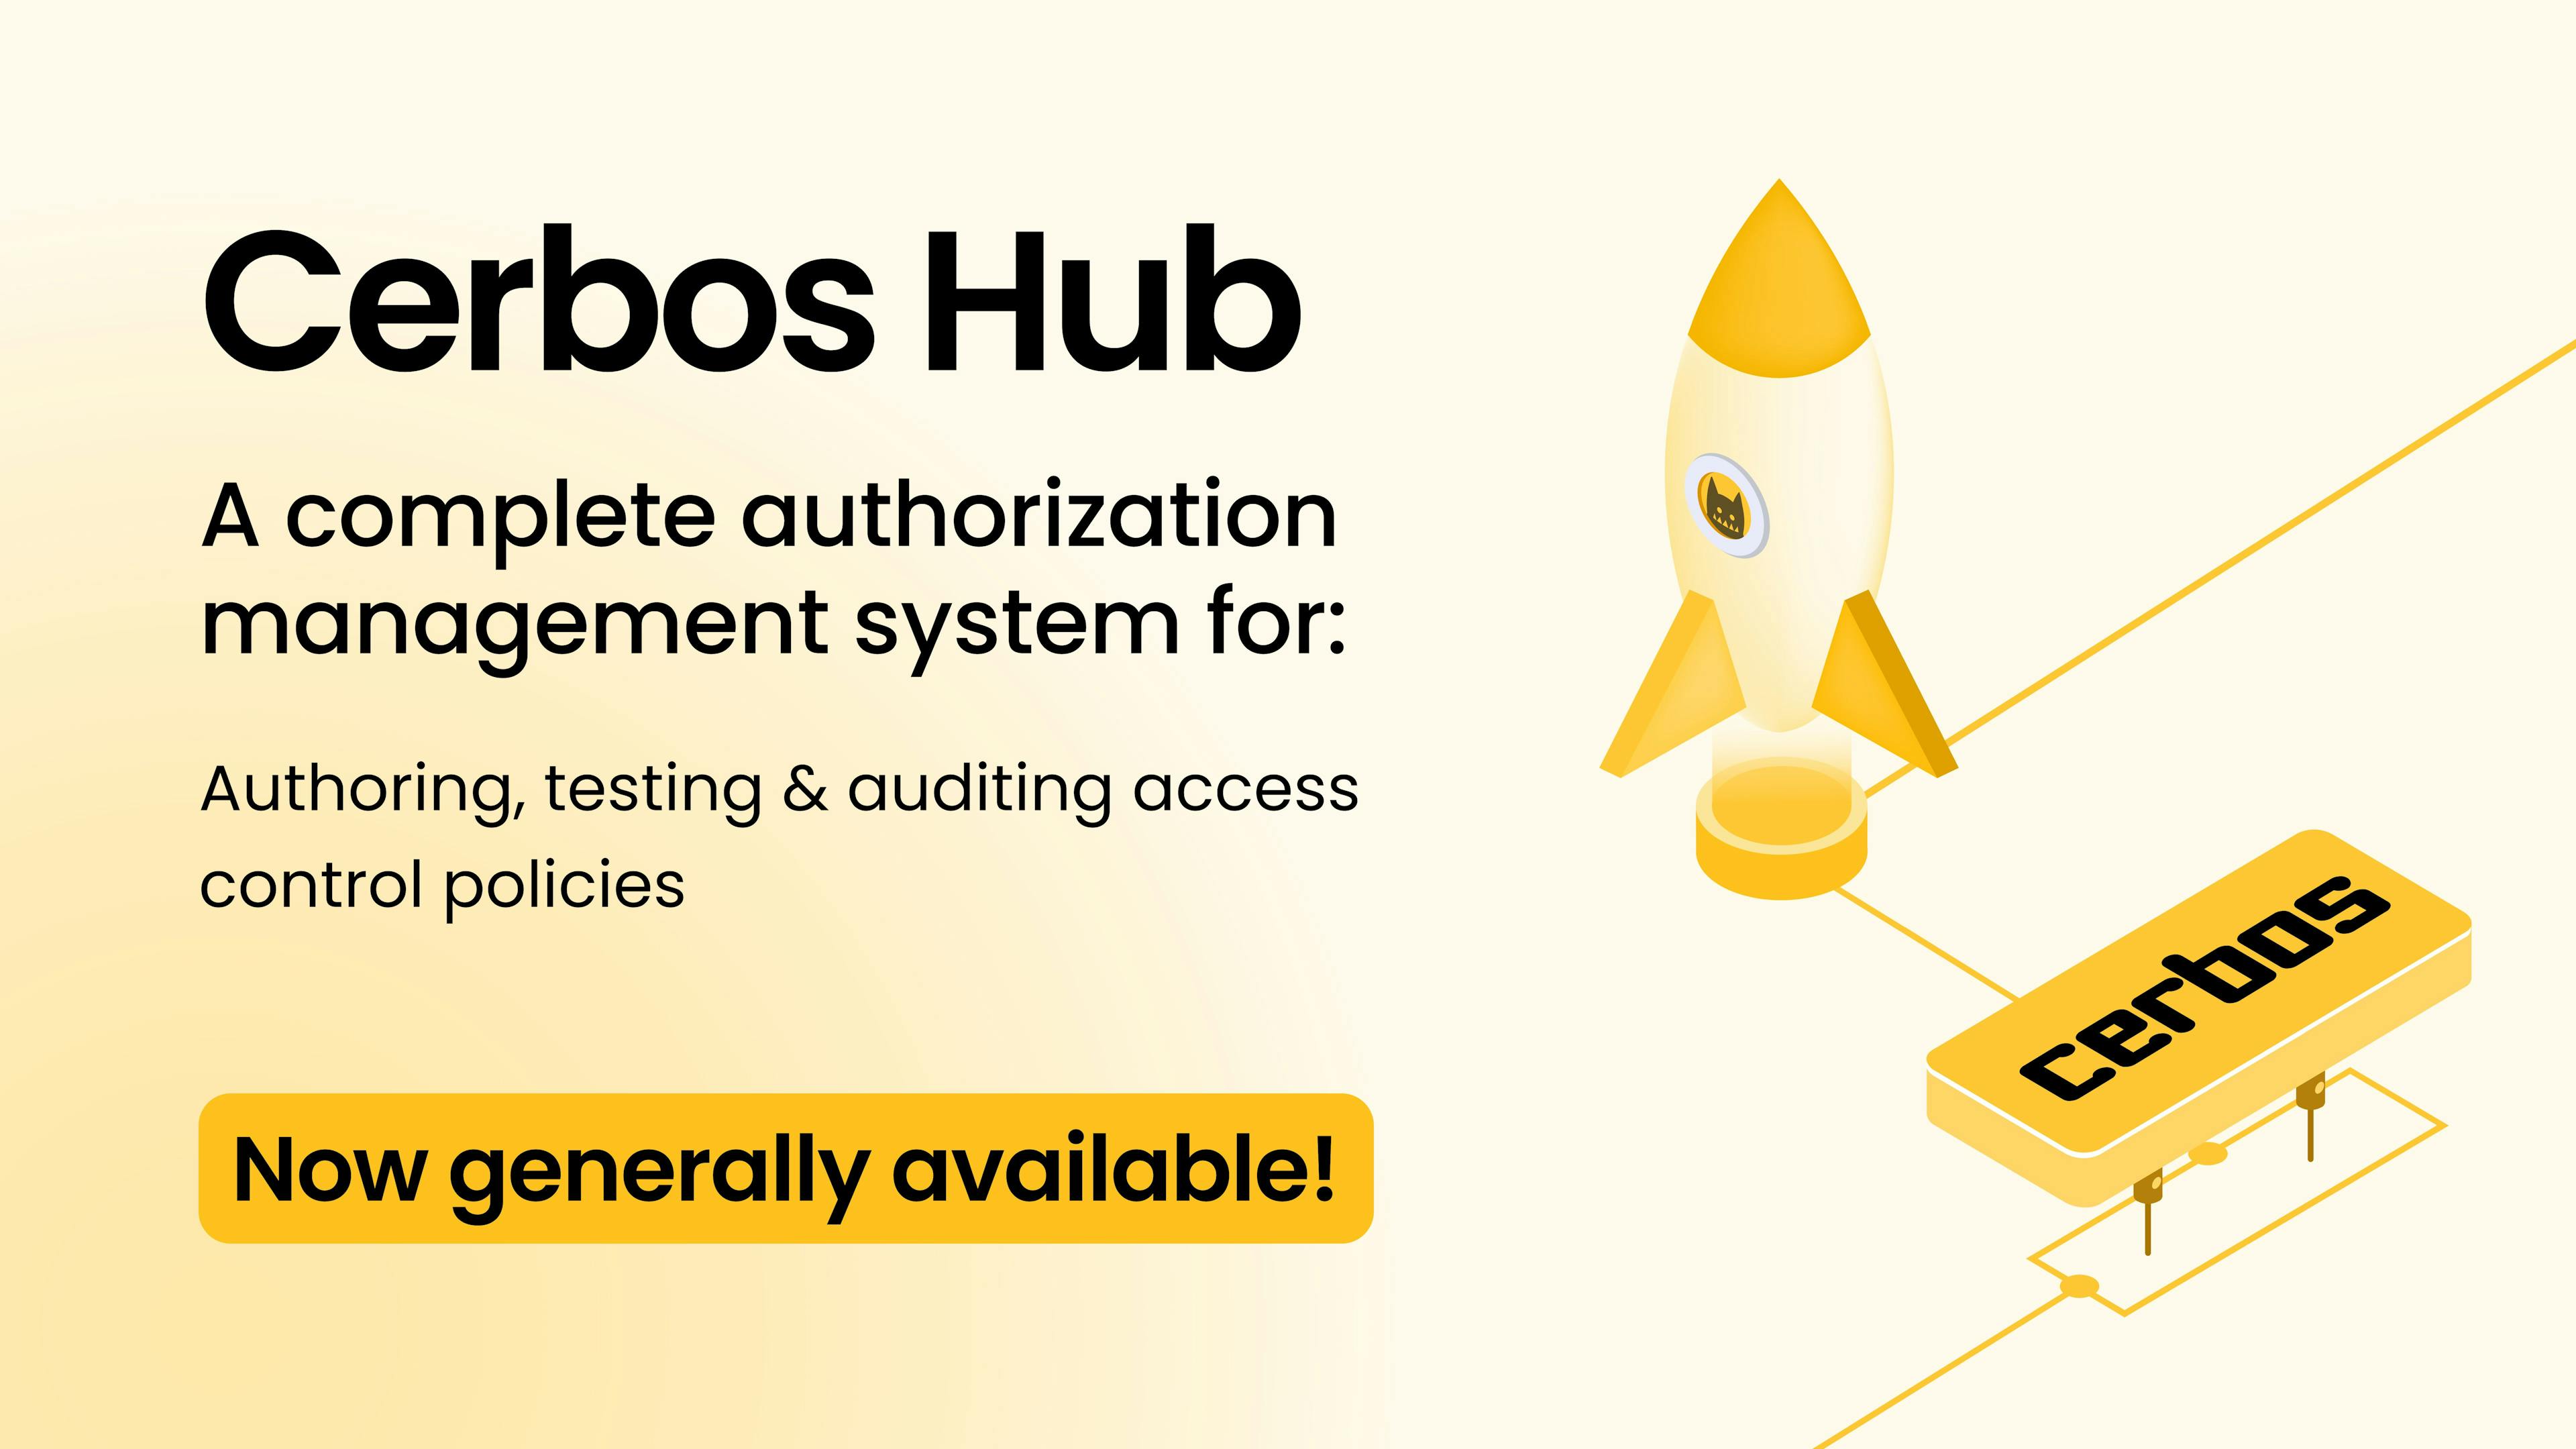 Cerbos Hub is now generally available!